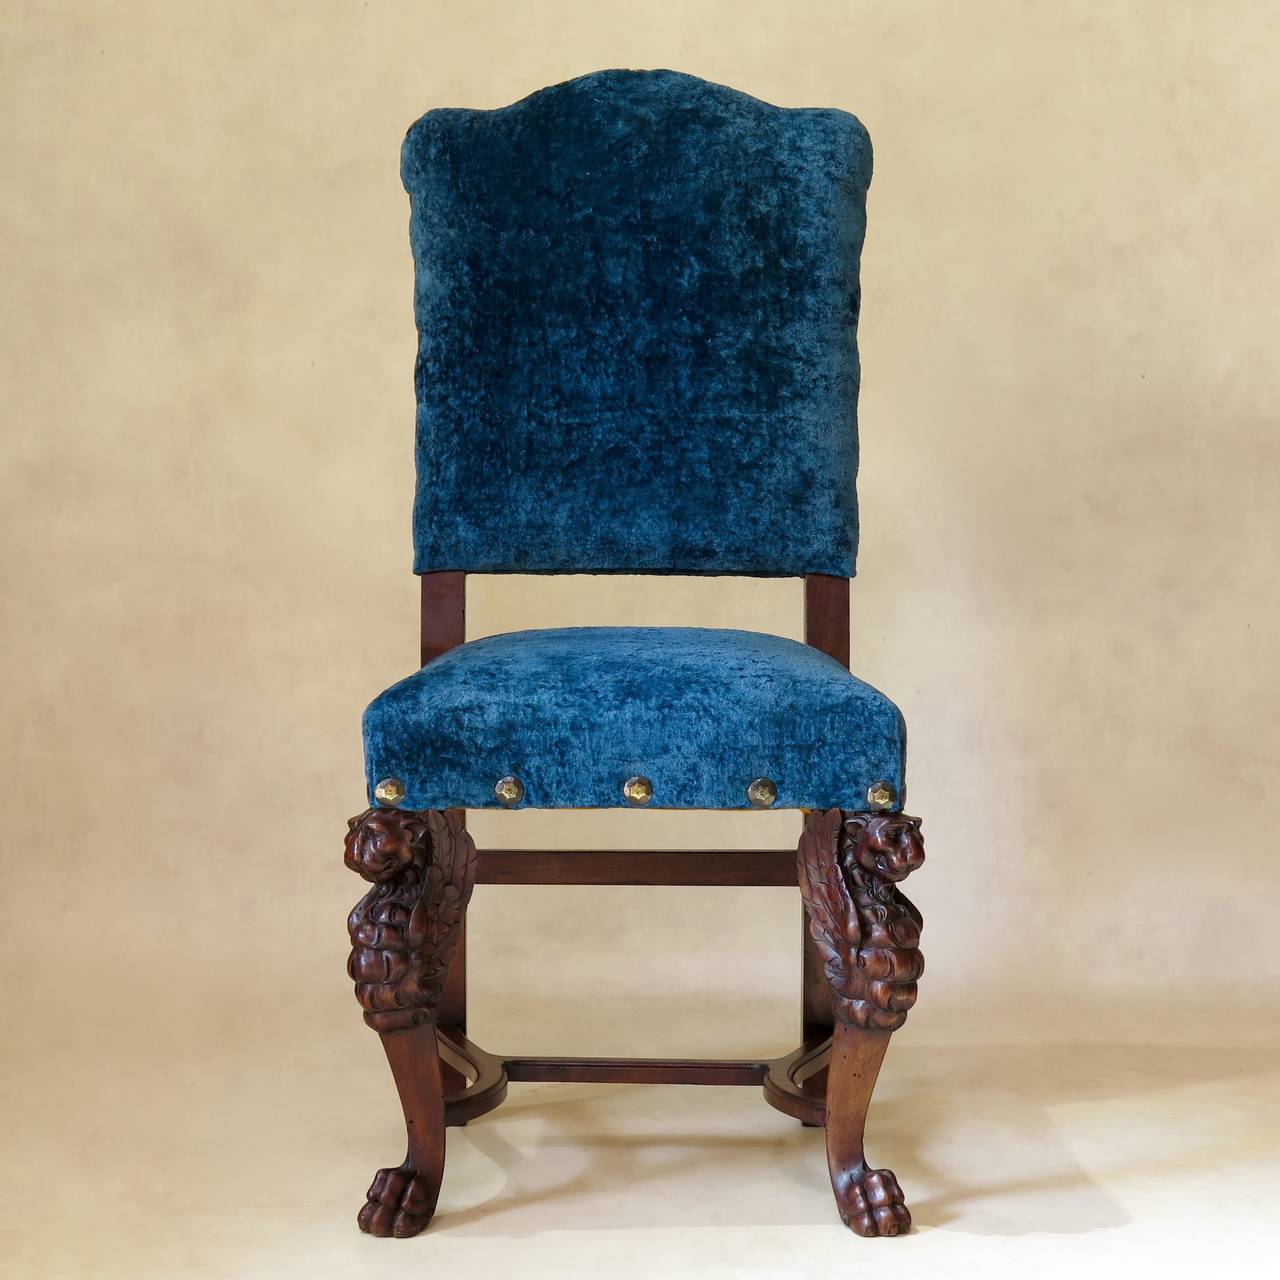 Set of four Renaissance style chairs with dramatic, carved lion head legs, ending in paw feet. Newly re-upholstered in a vintage, deep blue crushed velvet, with large nail head trim.